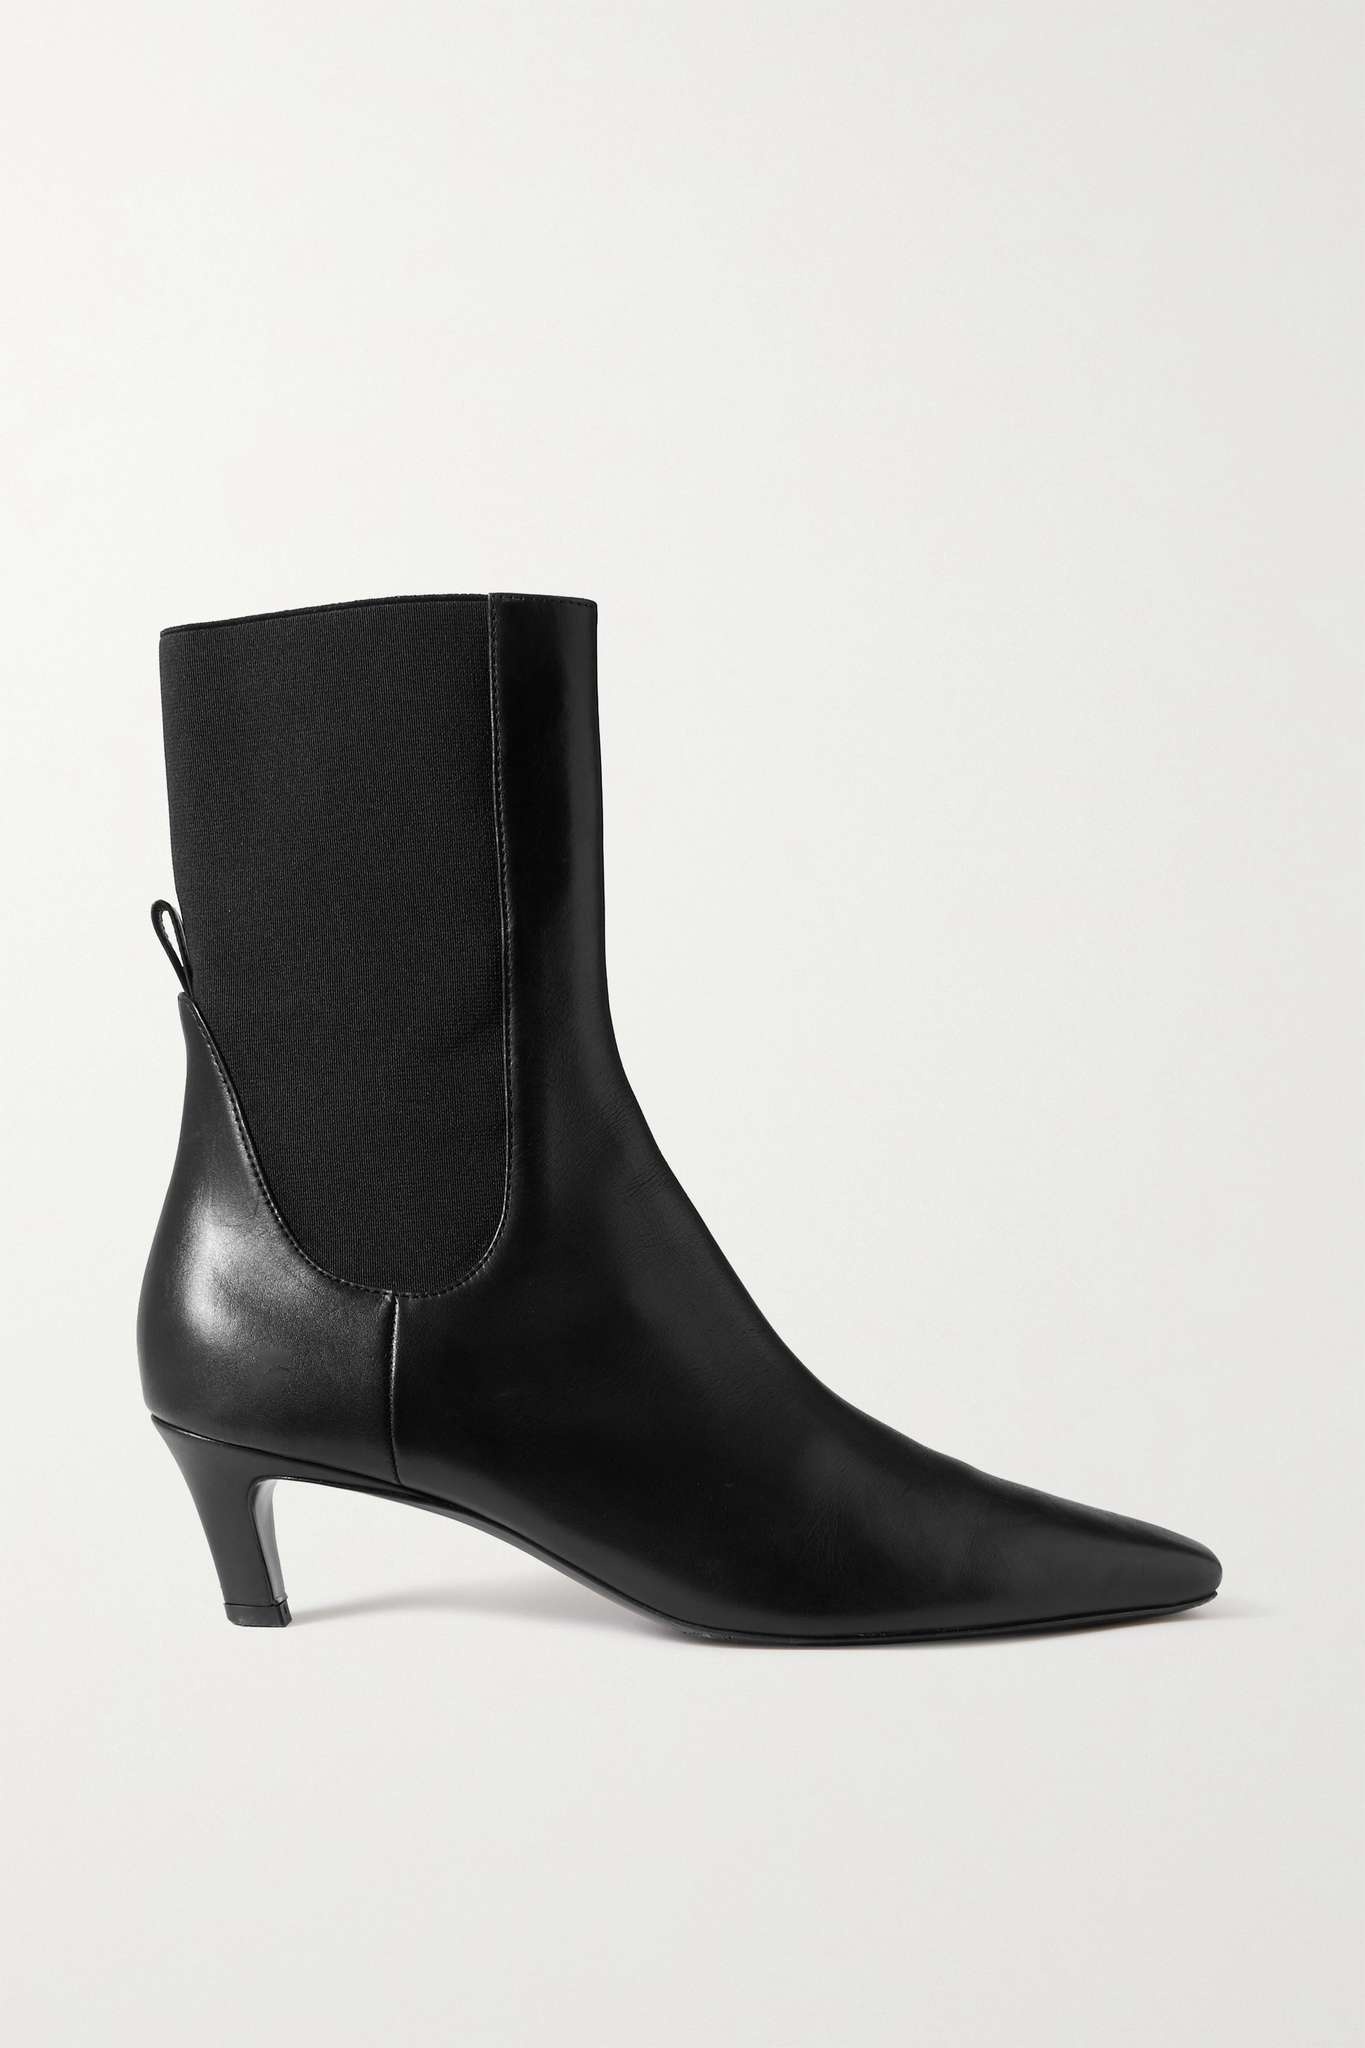 The Mid Heel leather ankle boots - 1